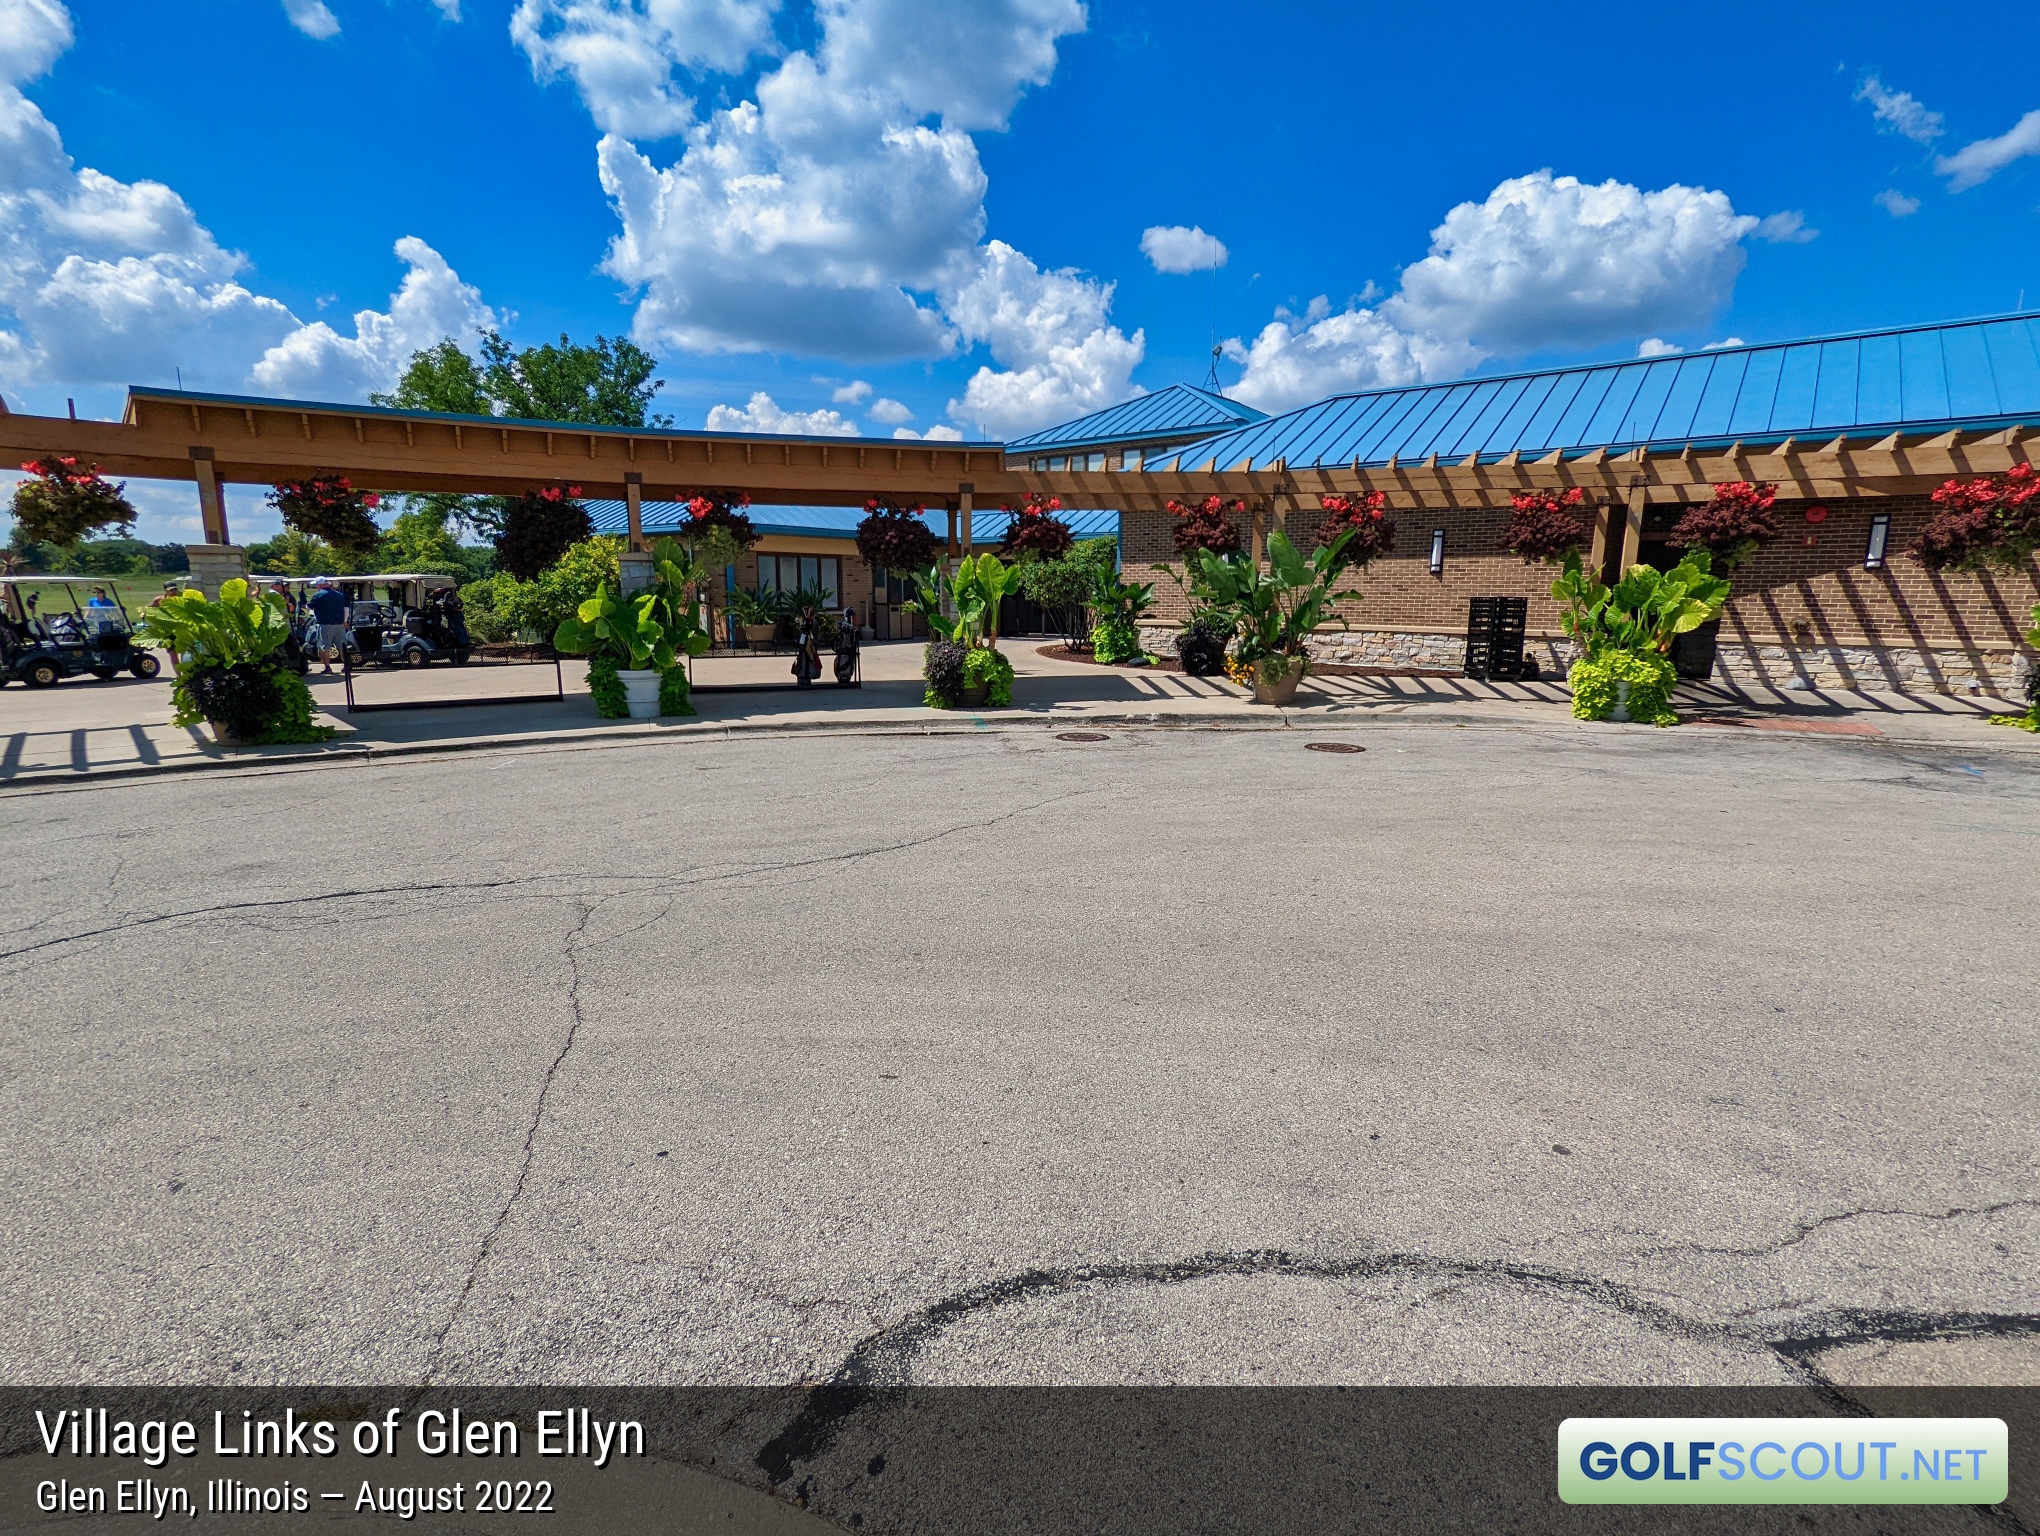 Photo of the clubhouse at Village Links of Glen Ellyn - 9 Hole Course in Glen Ellyn, Illinois. 